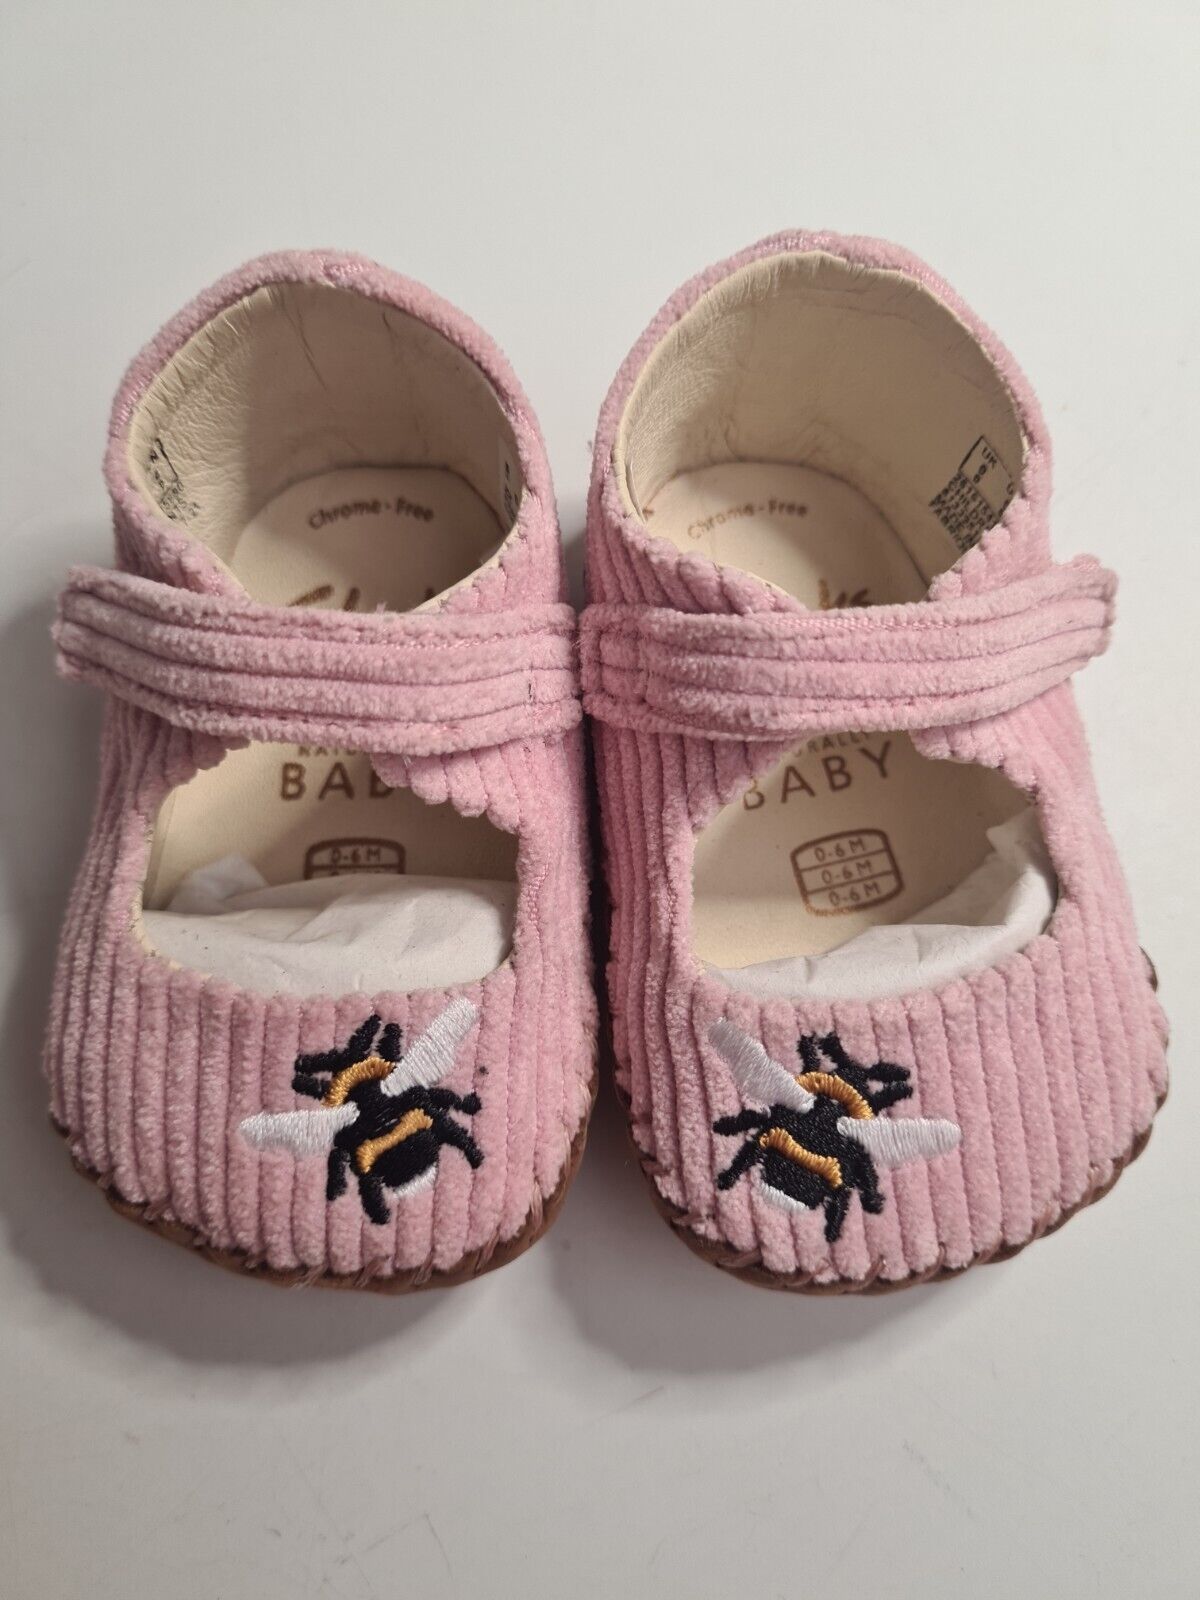 Clarks Baby Halo Pink Cord Shoes Size 0-6 Months **** VS3